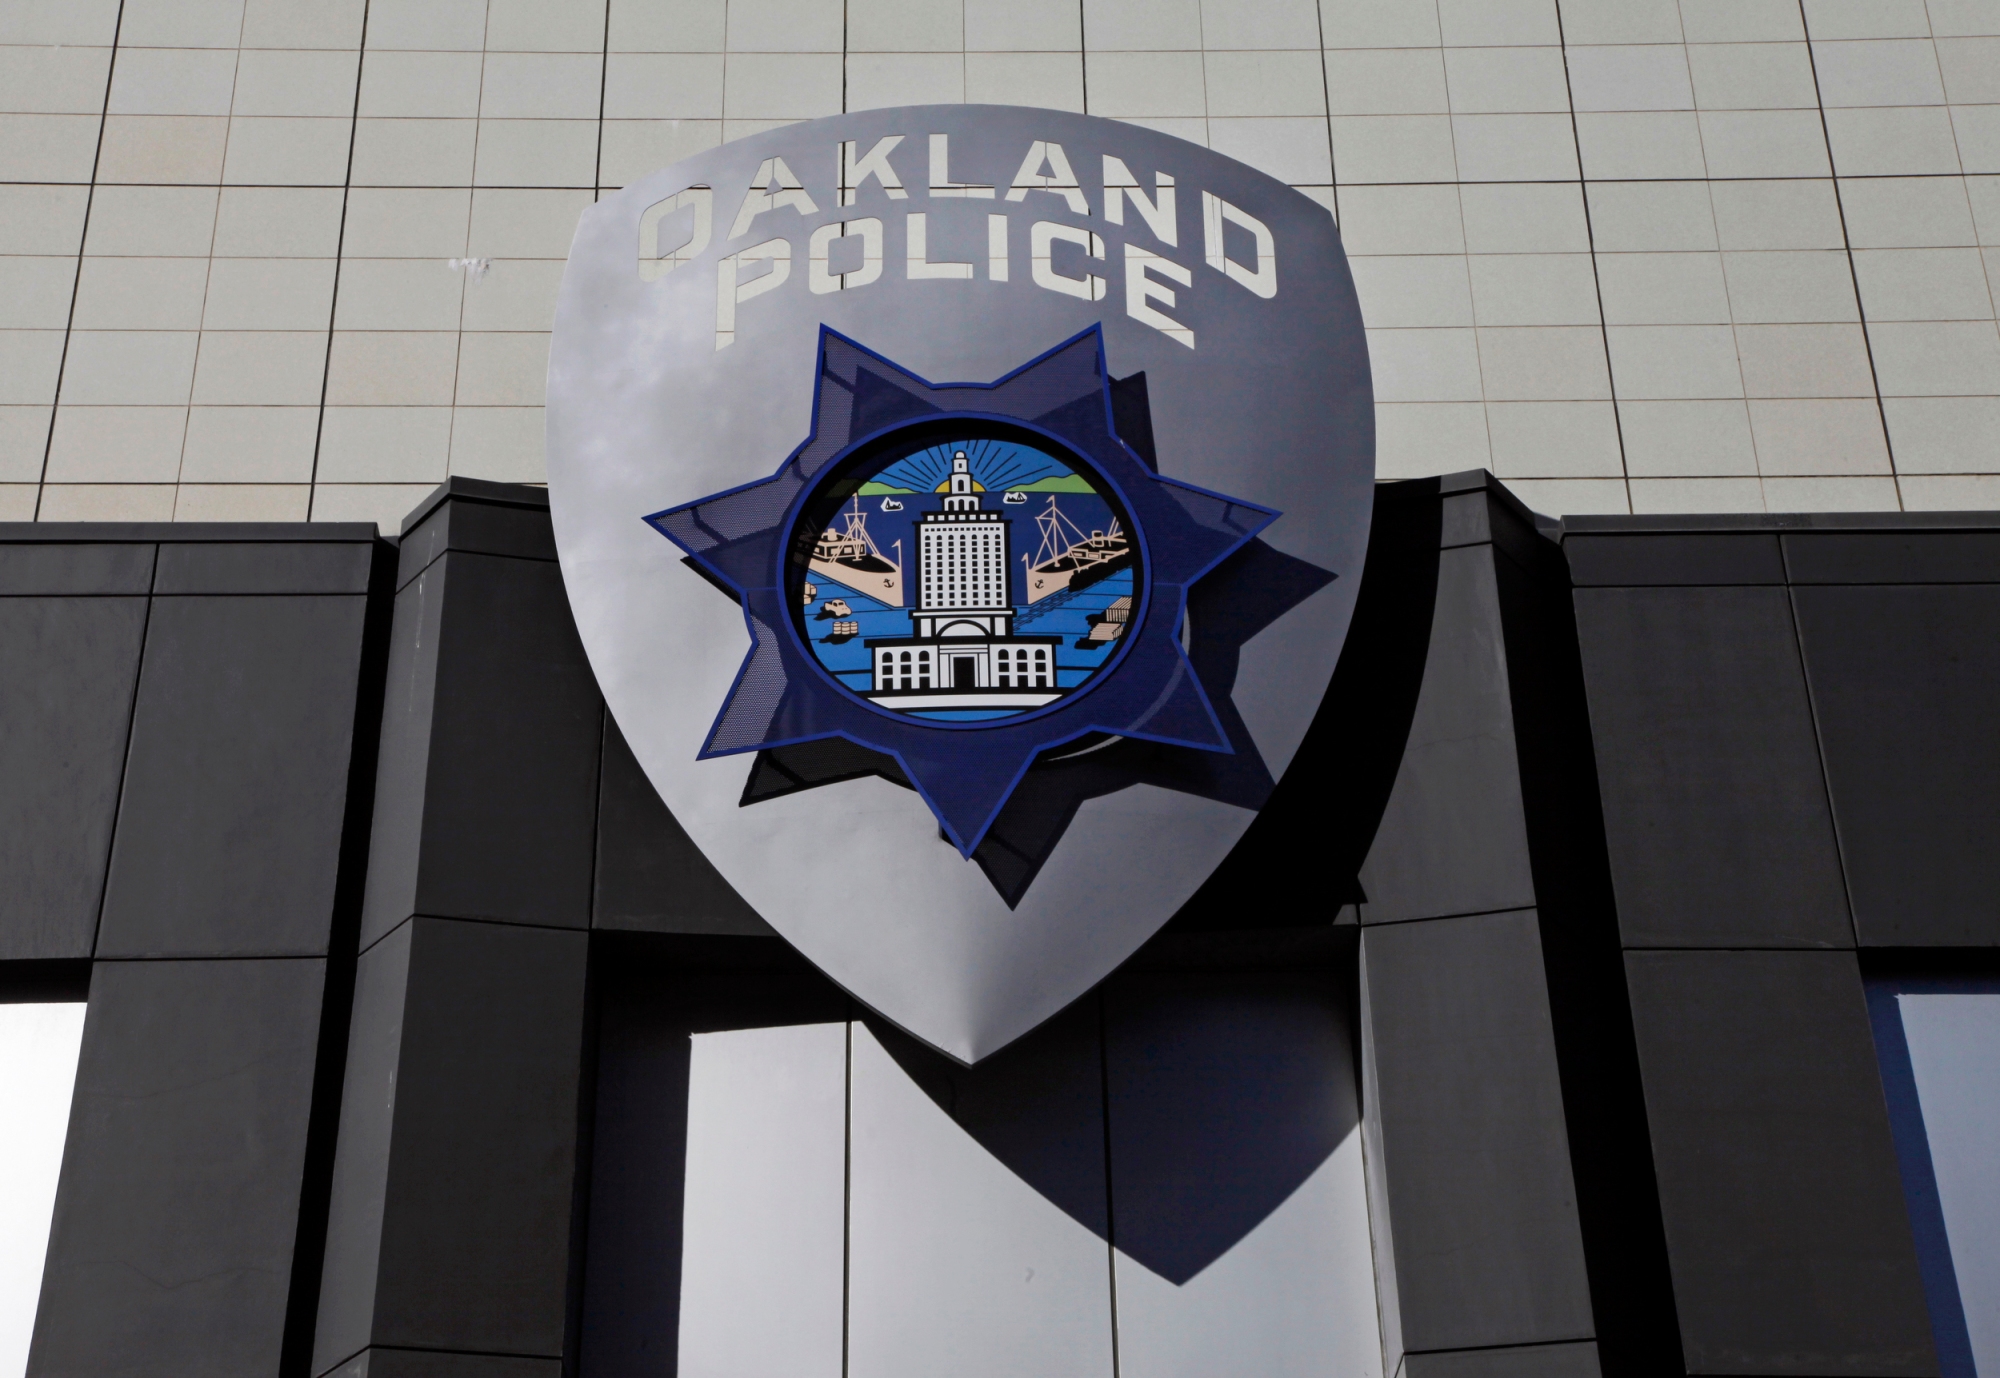 Nearly half of Oakland’s women police officers say they’ve felt harassed, faced discrimination